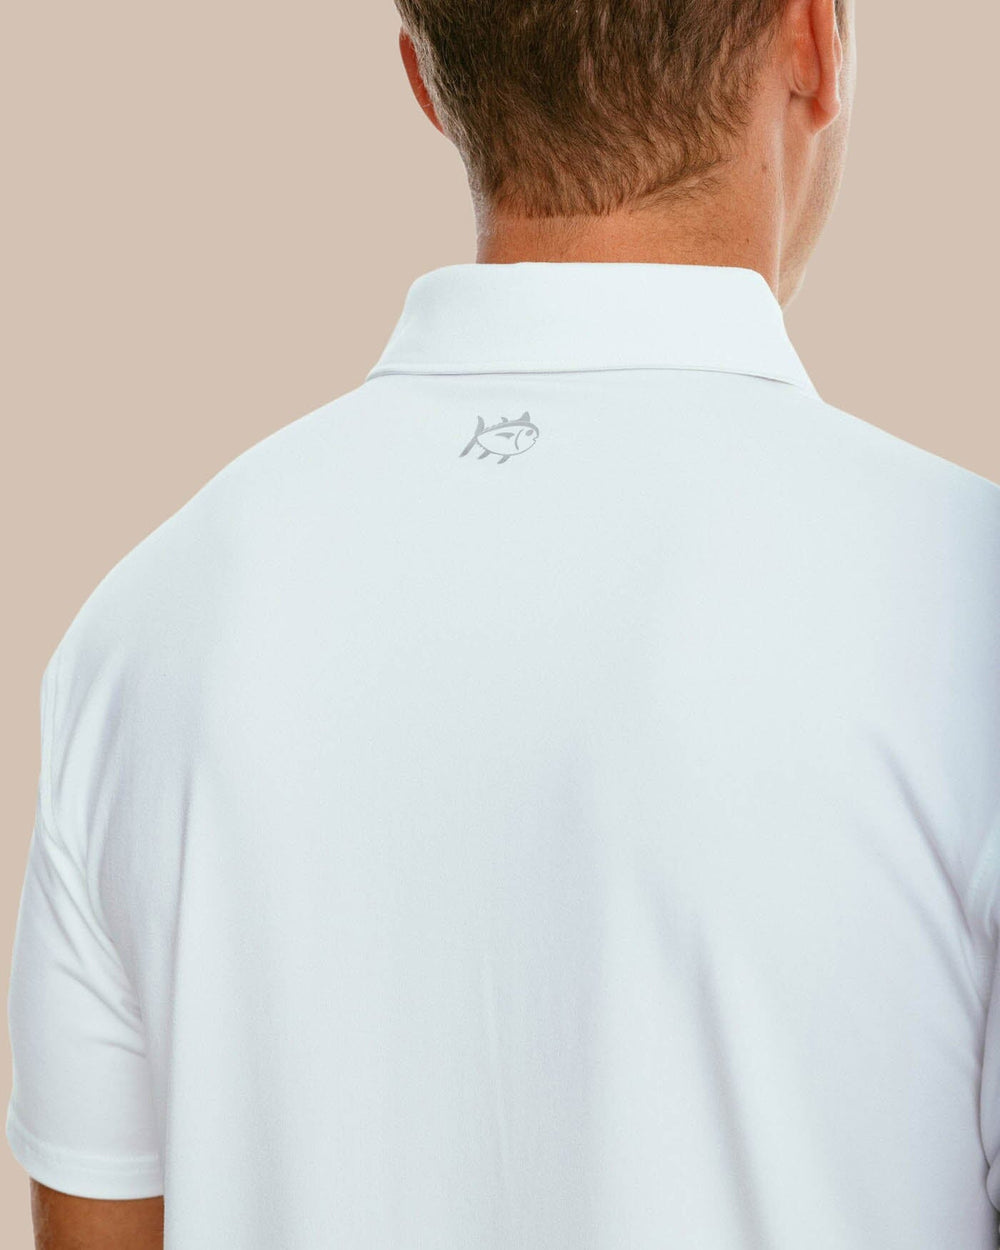 The yoke of the Men's Ryder Performance Polo Shirt by Southern Tide - Classic White